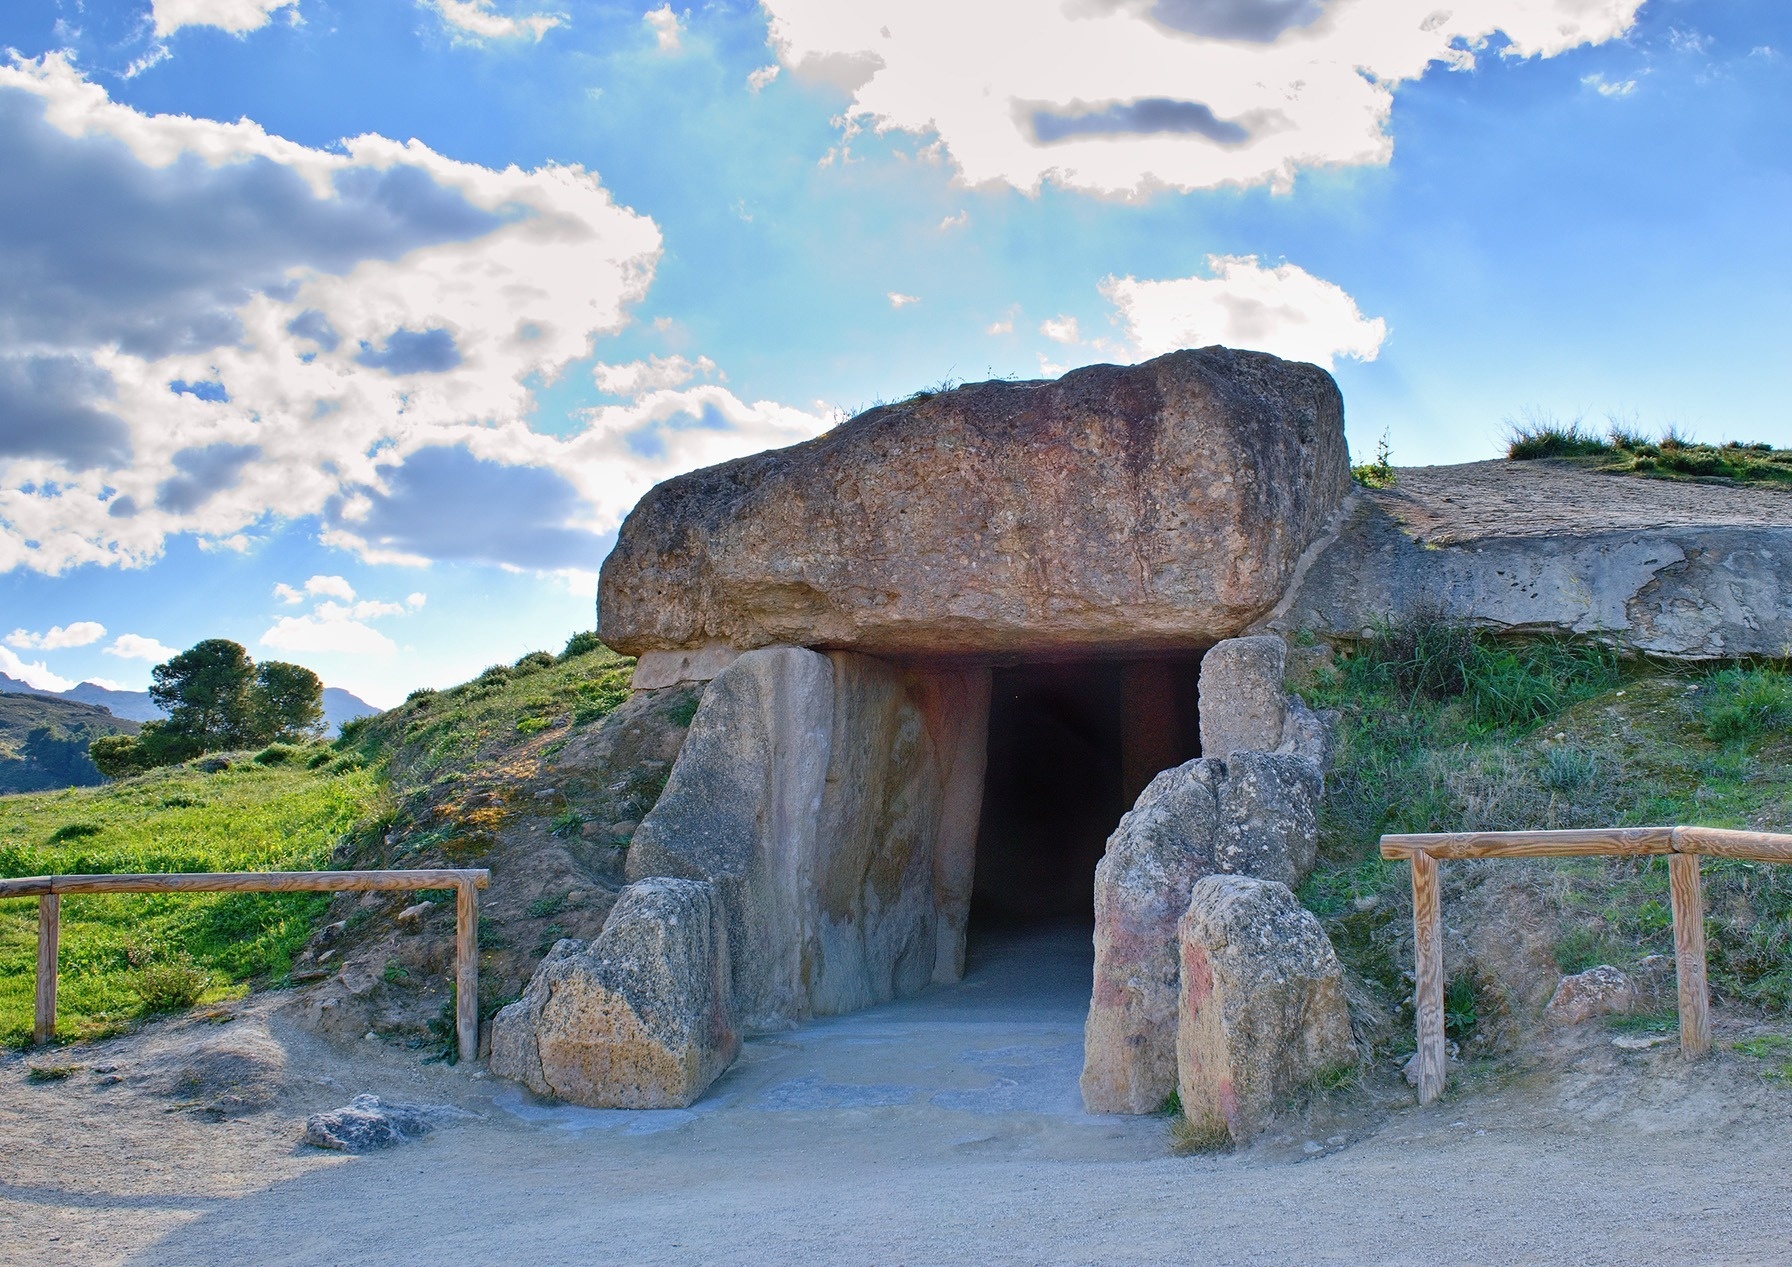 The Dolmens of Antequera